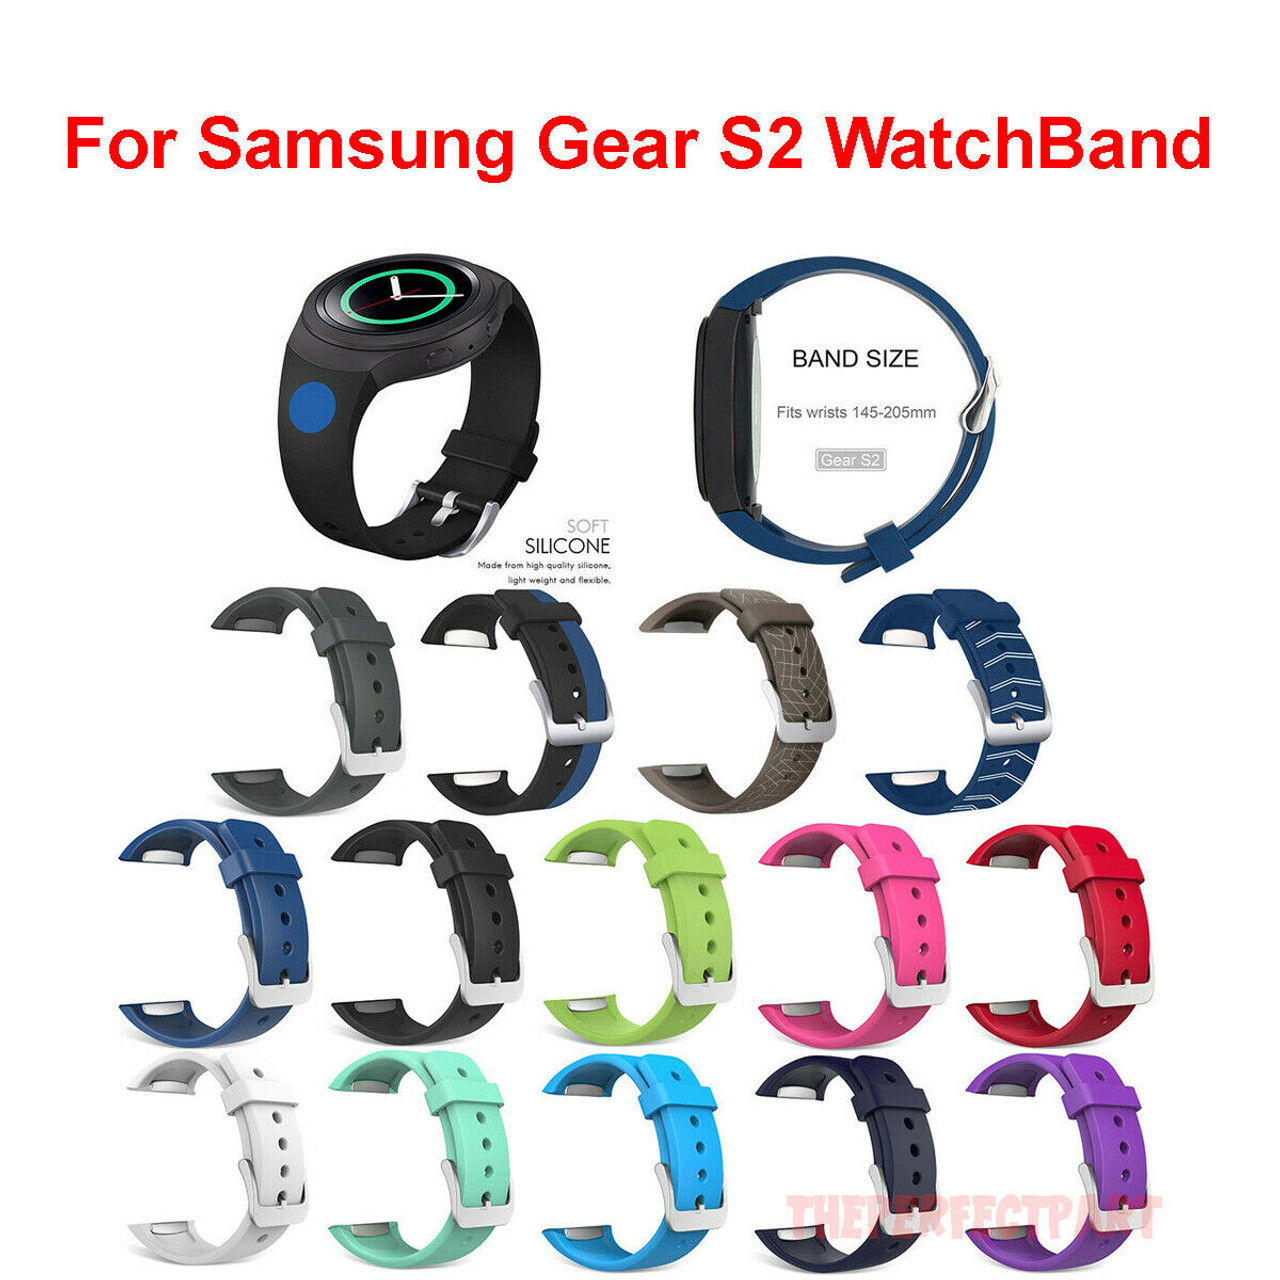 Replacement Sport Silicone Band Bracelet For Samsung Galaxy Gear S2 Watchband